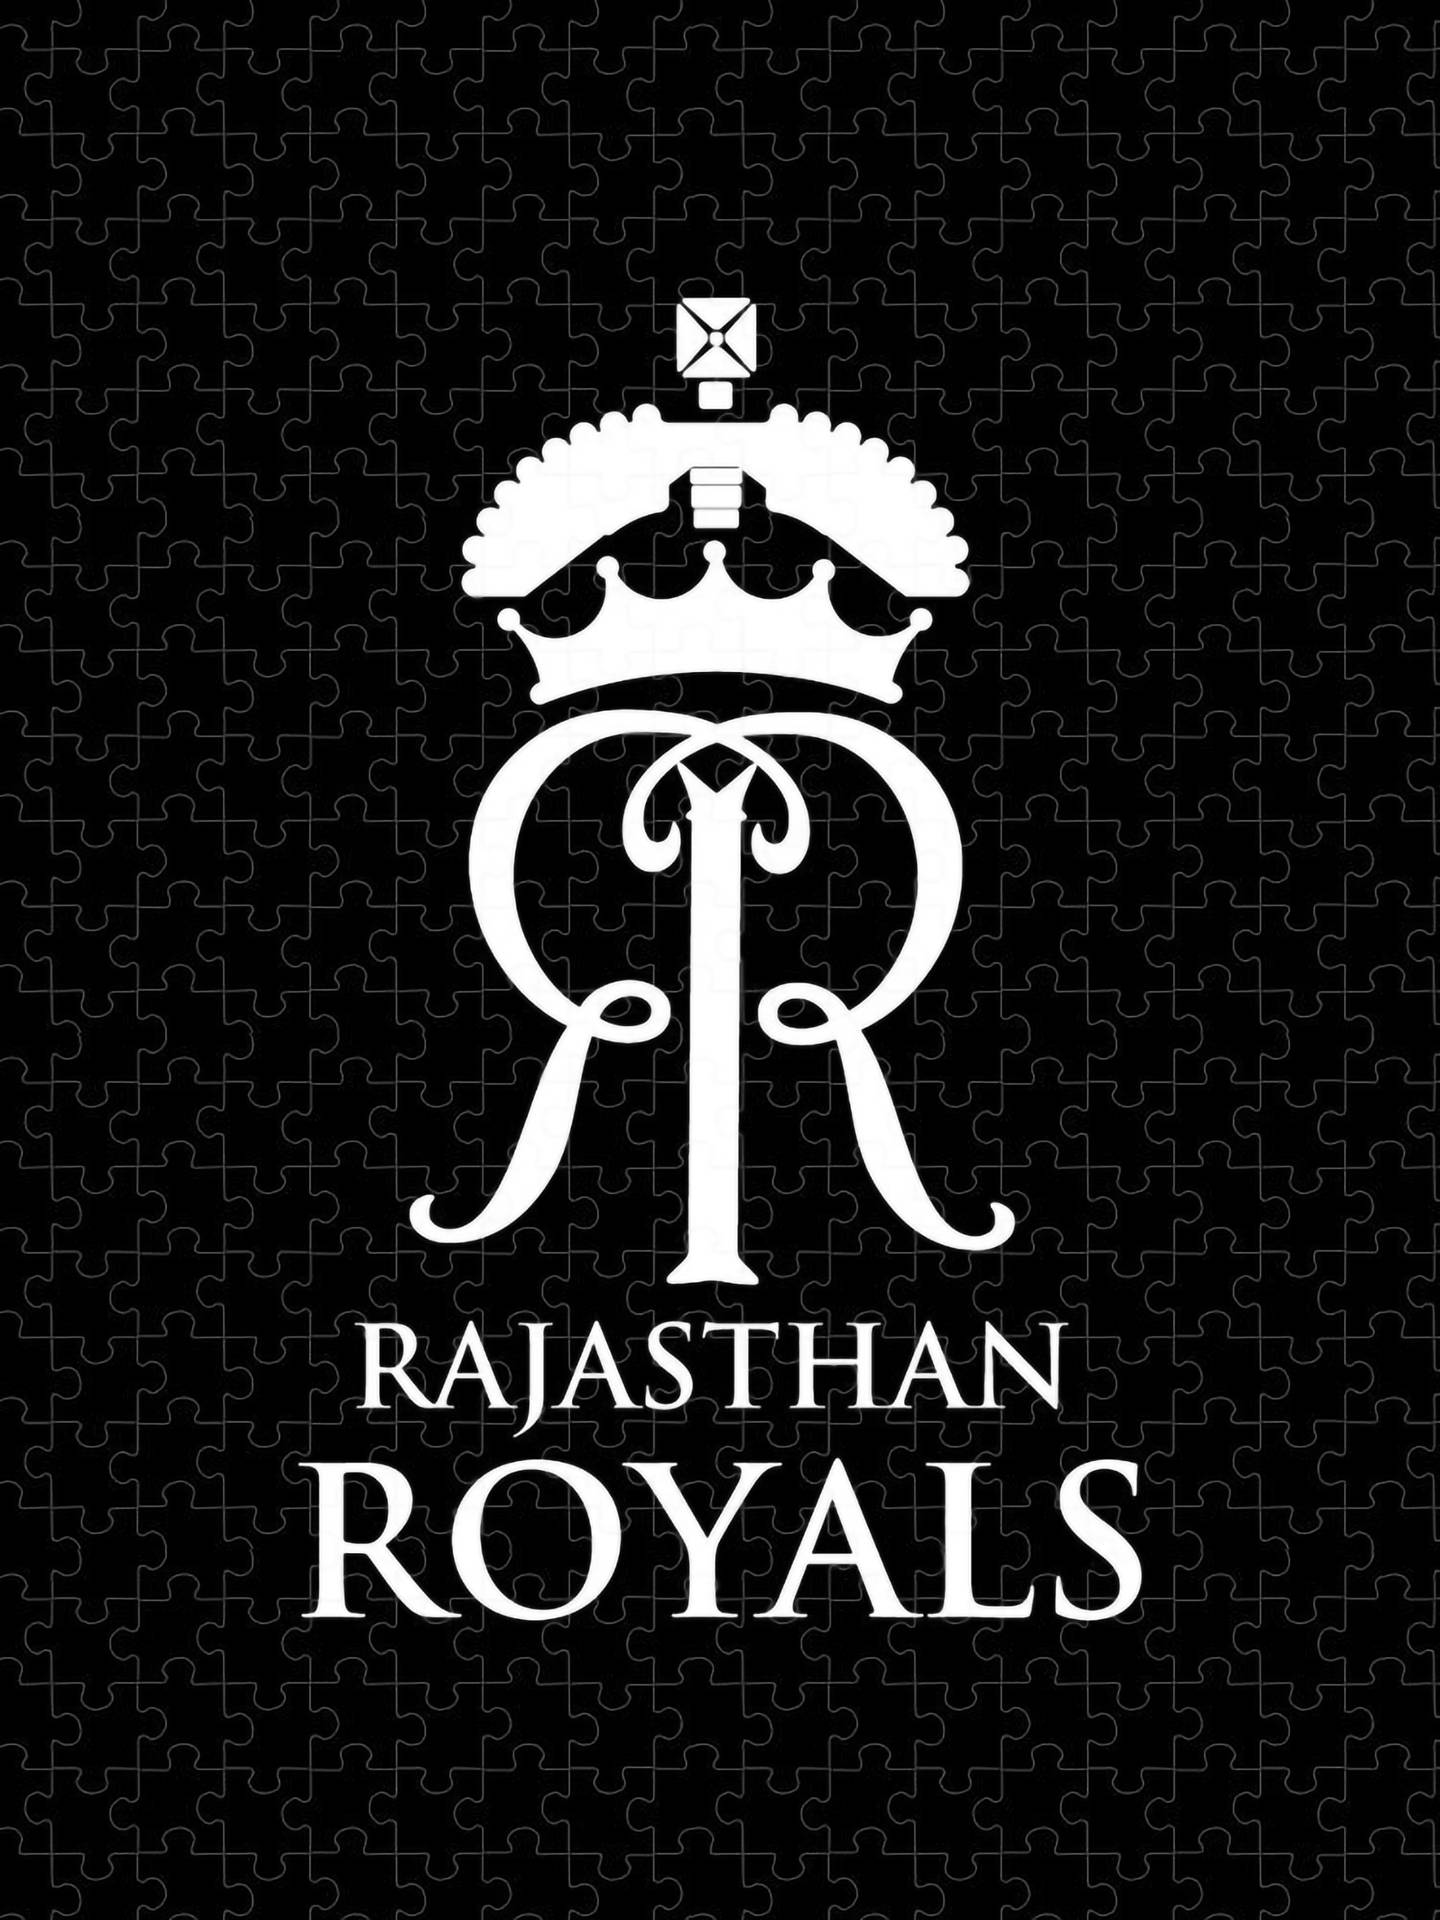 Rajasthan Royals Puzzle Background